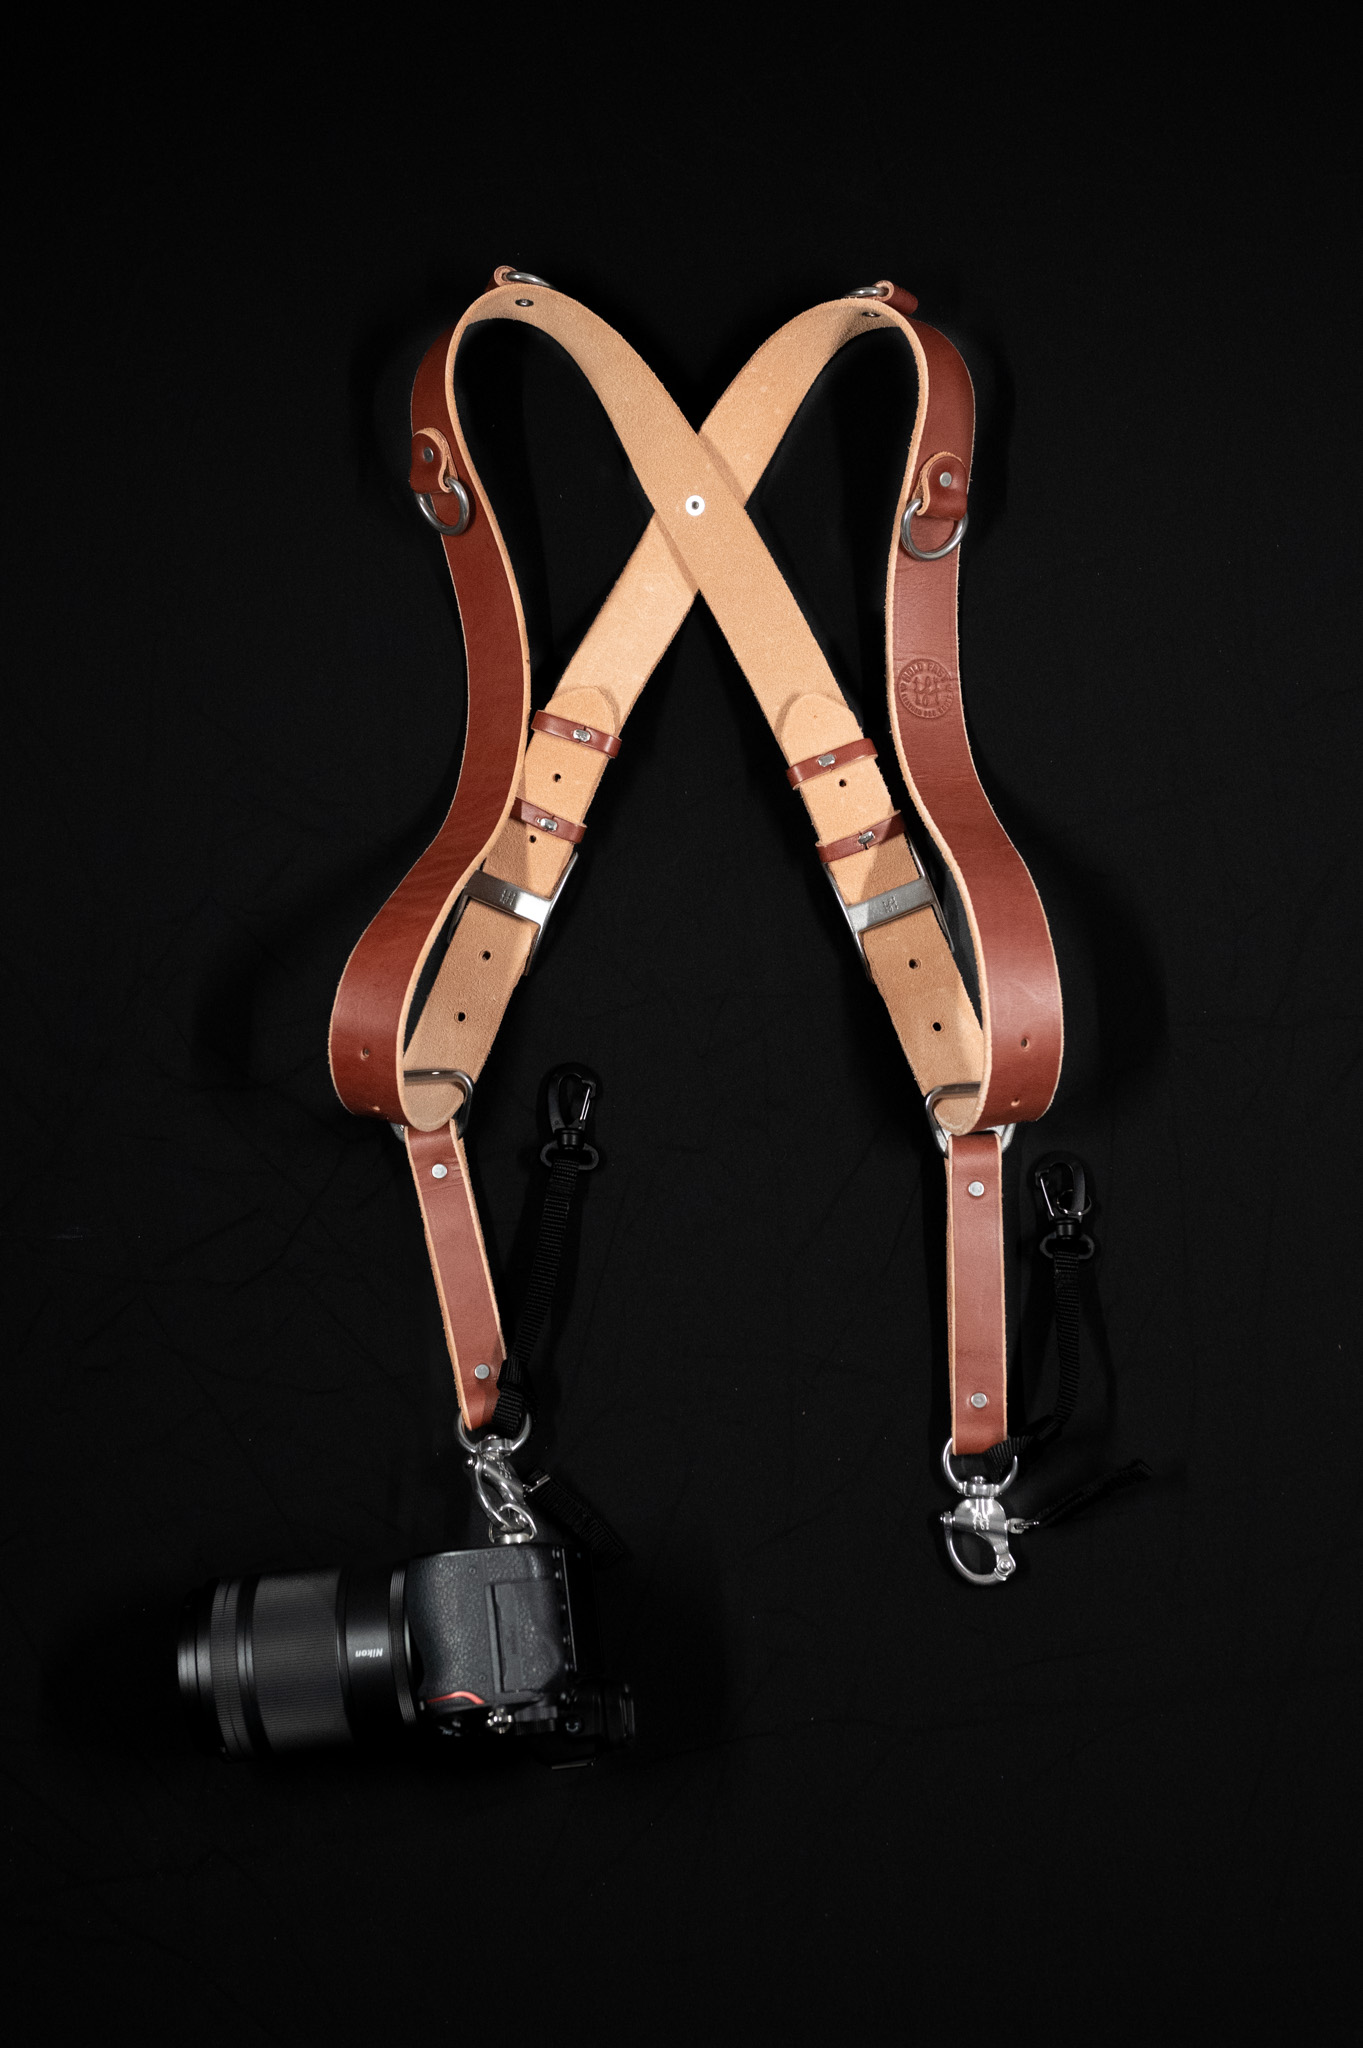 HoldFast Money Maker Dual Camera Strap Review